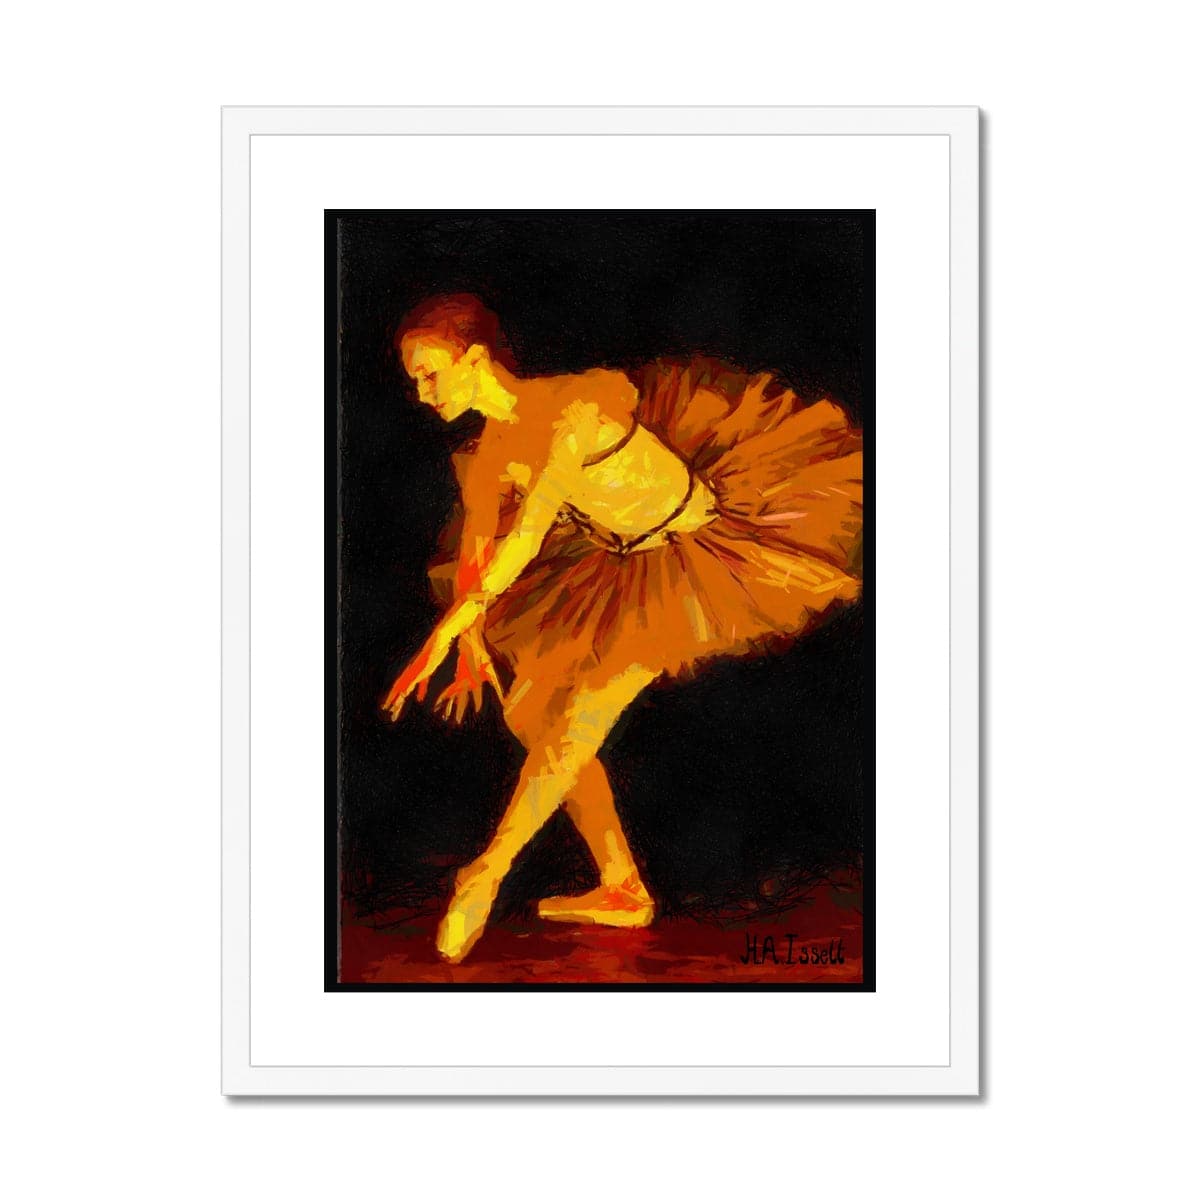 Bowing Ballerina Framed & Mounted Print